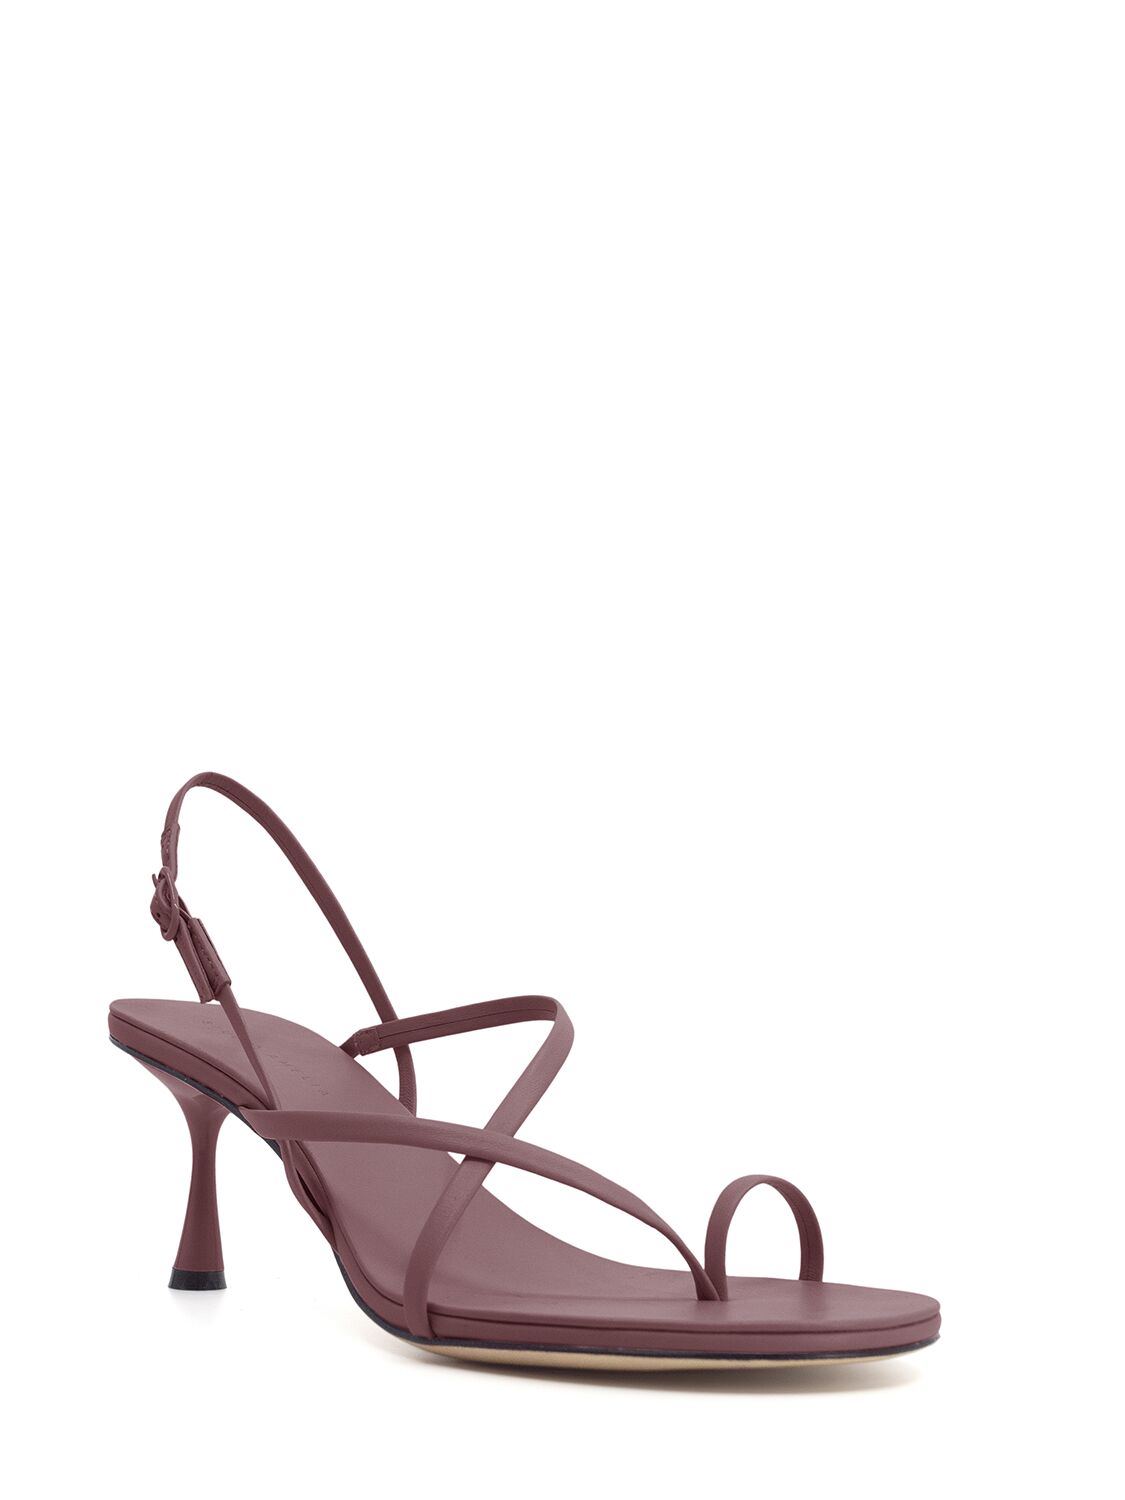 Shop Studio Amelia 70mm Agatha Leather Sandals In Mulberry